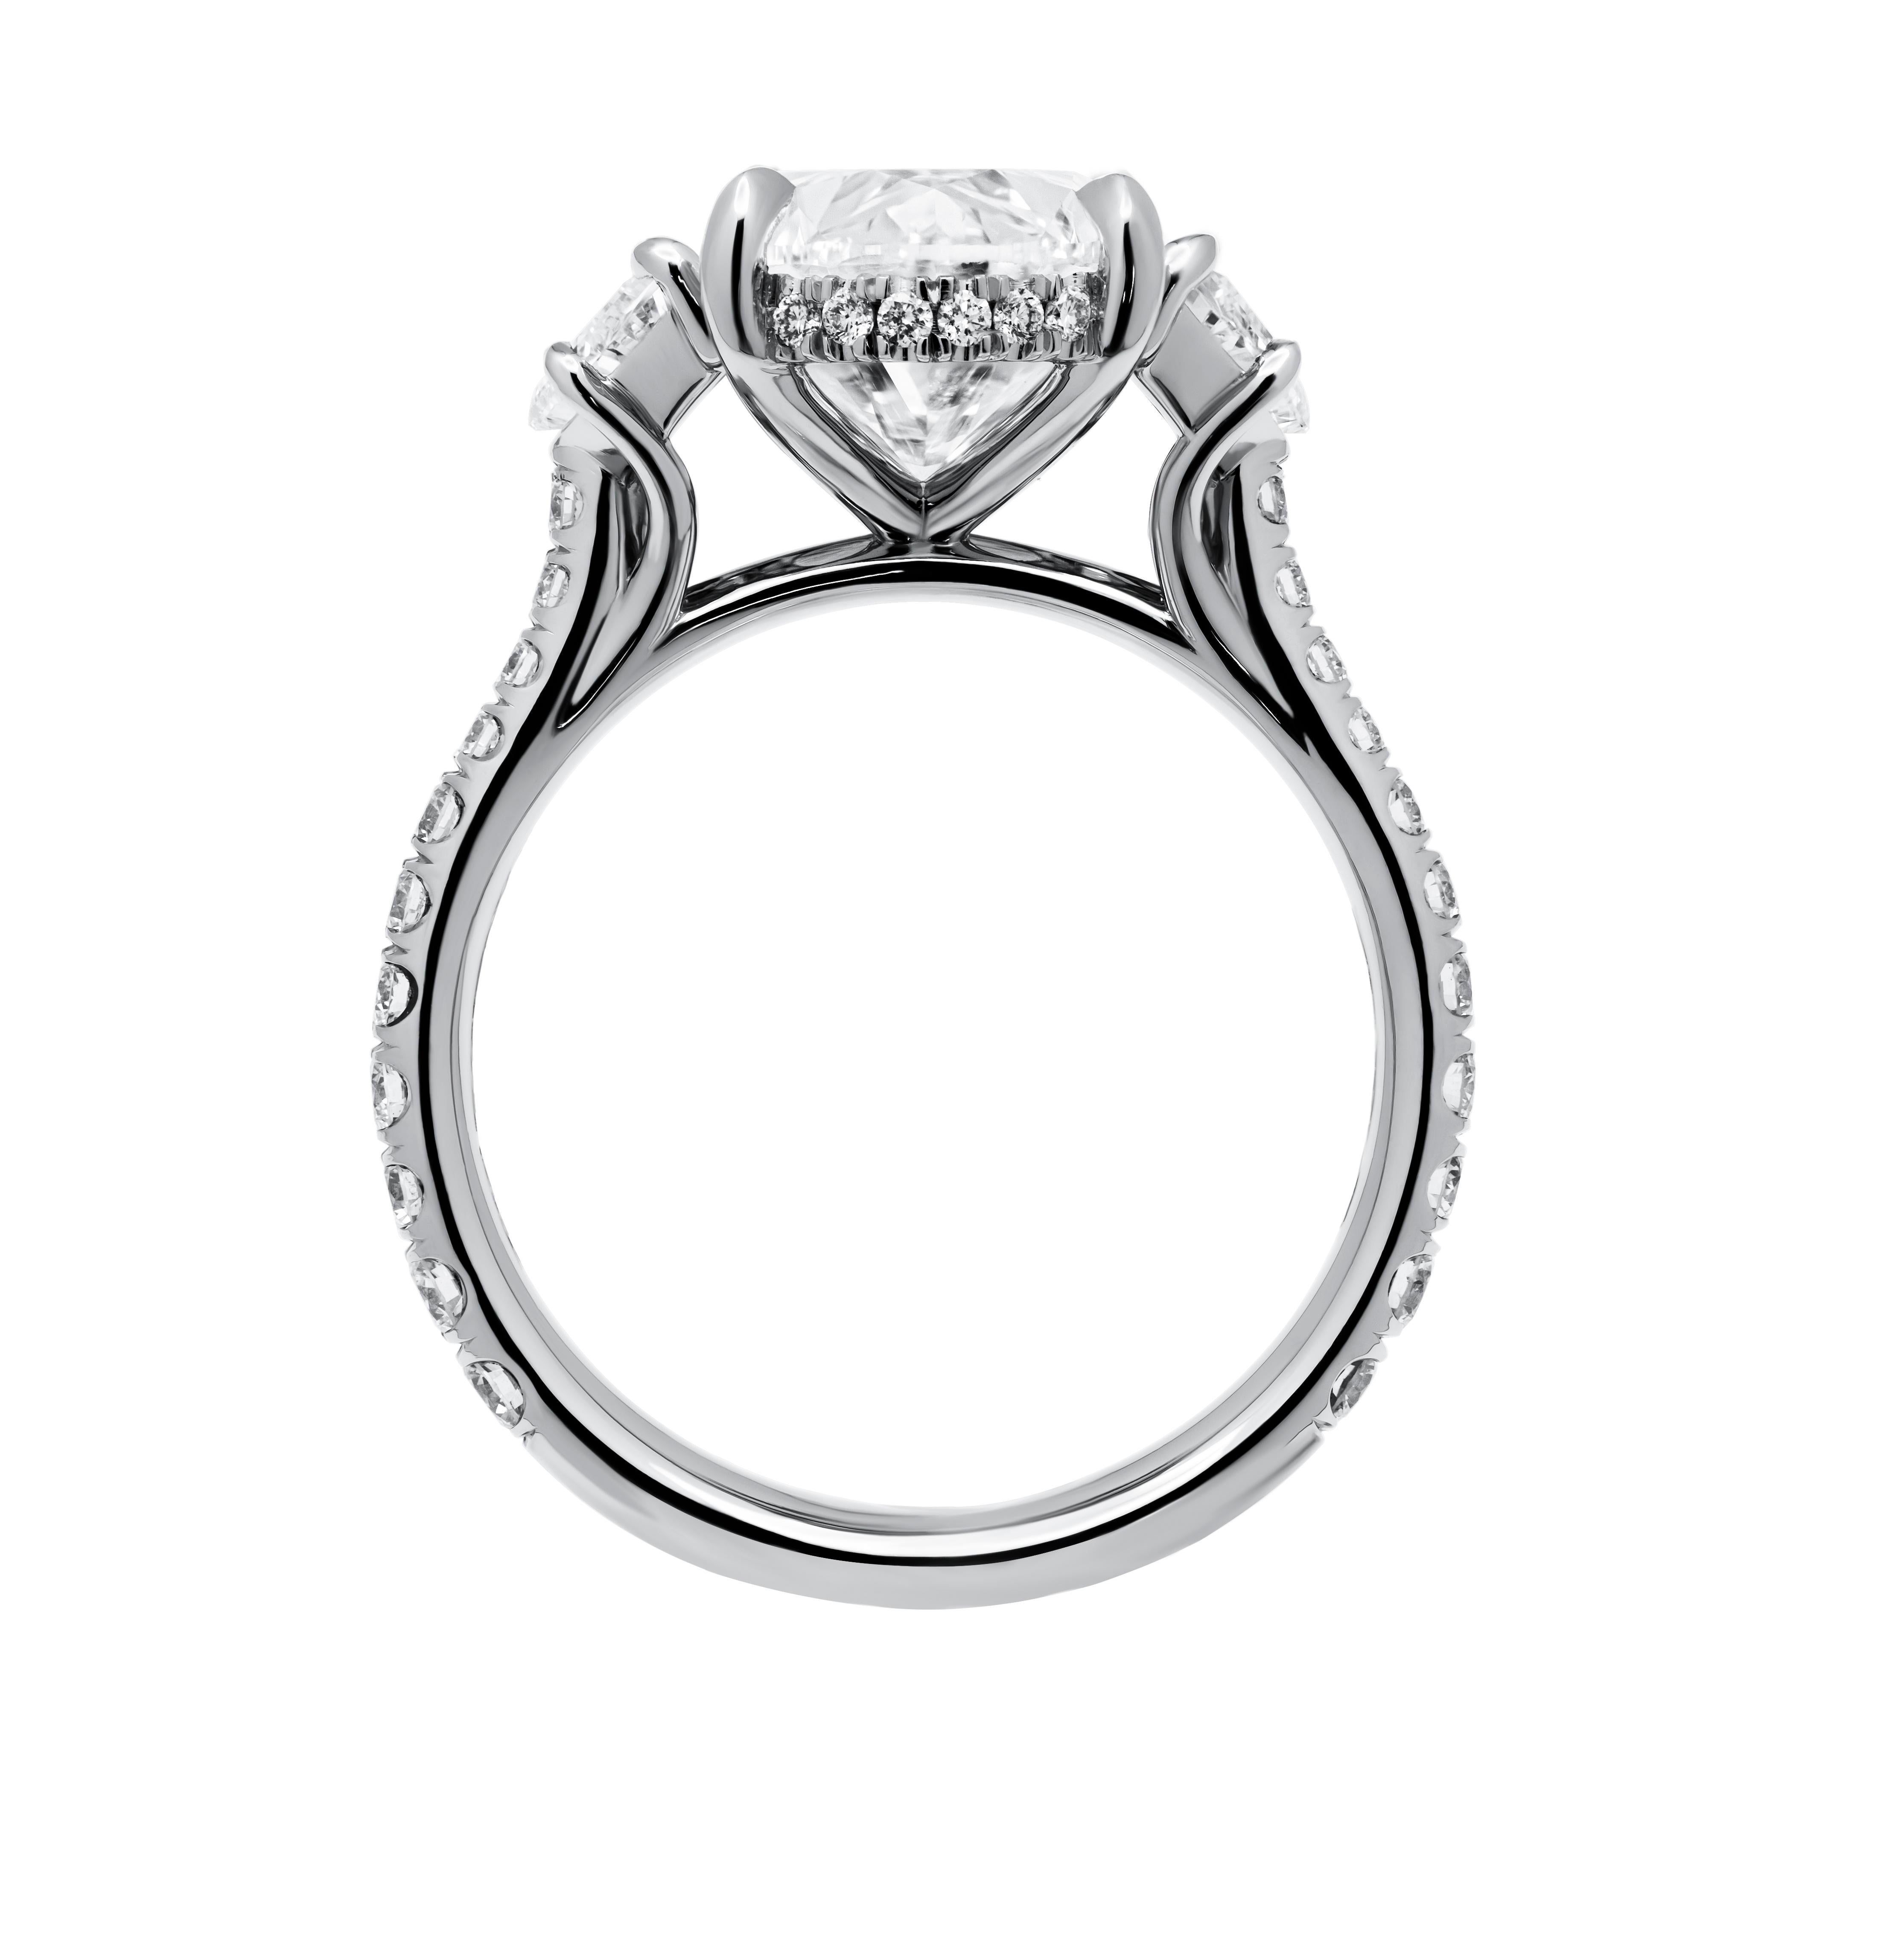 Elevate your style with this stunning three-stone ring, crafted in luxurious platinum to epitomize sophistication and grace. At its core gleams a breathtaking 5.03-carat oval-shaped diamond, boasting a captivating G color and alluring SI2 clarity,